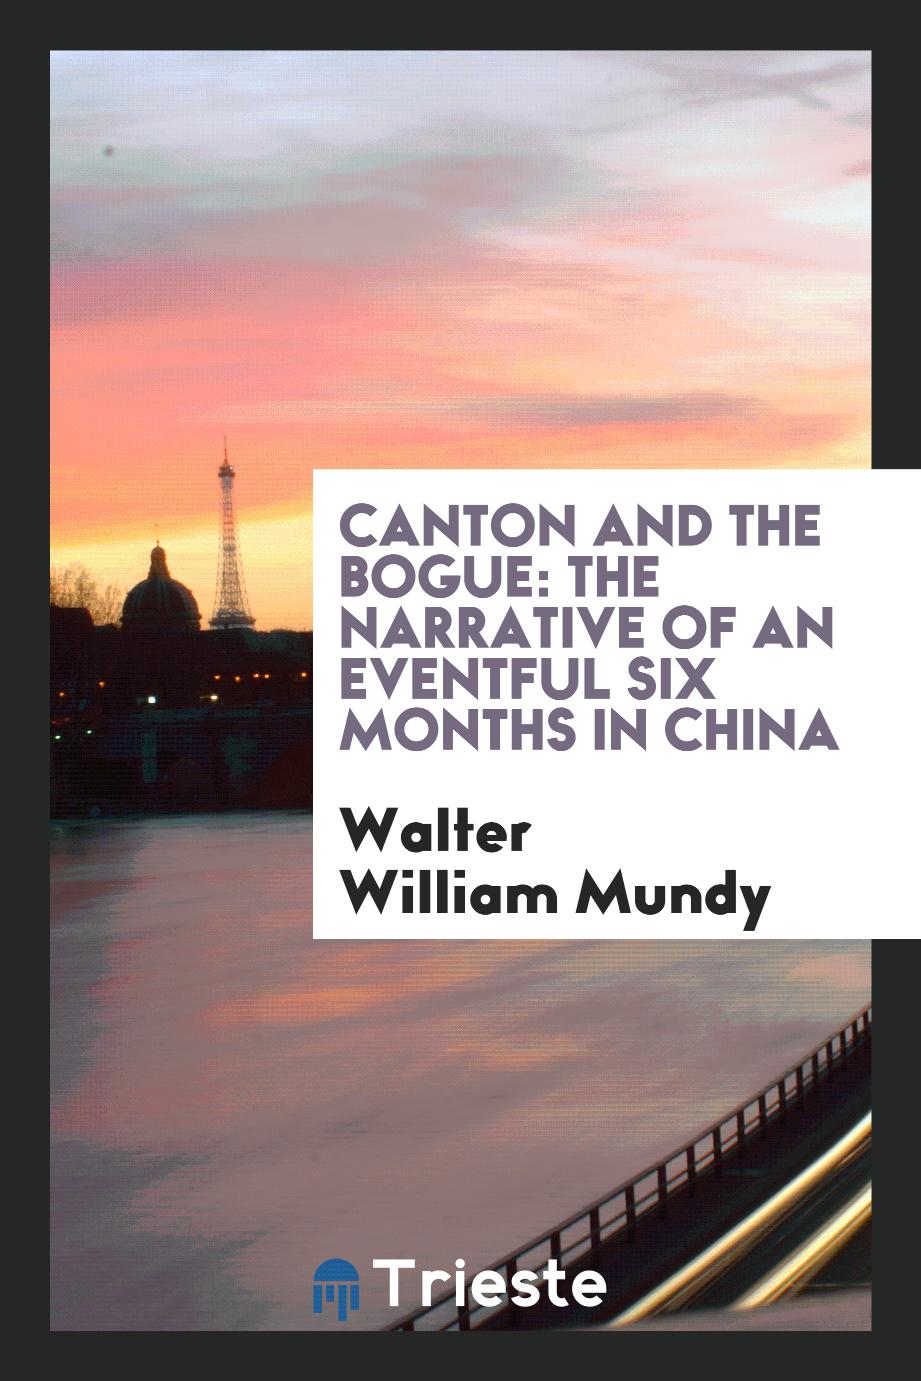 Canton and the Bogue: the narrative of an eventful six months in China